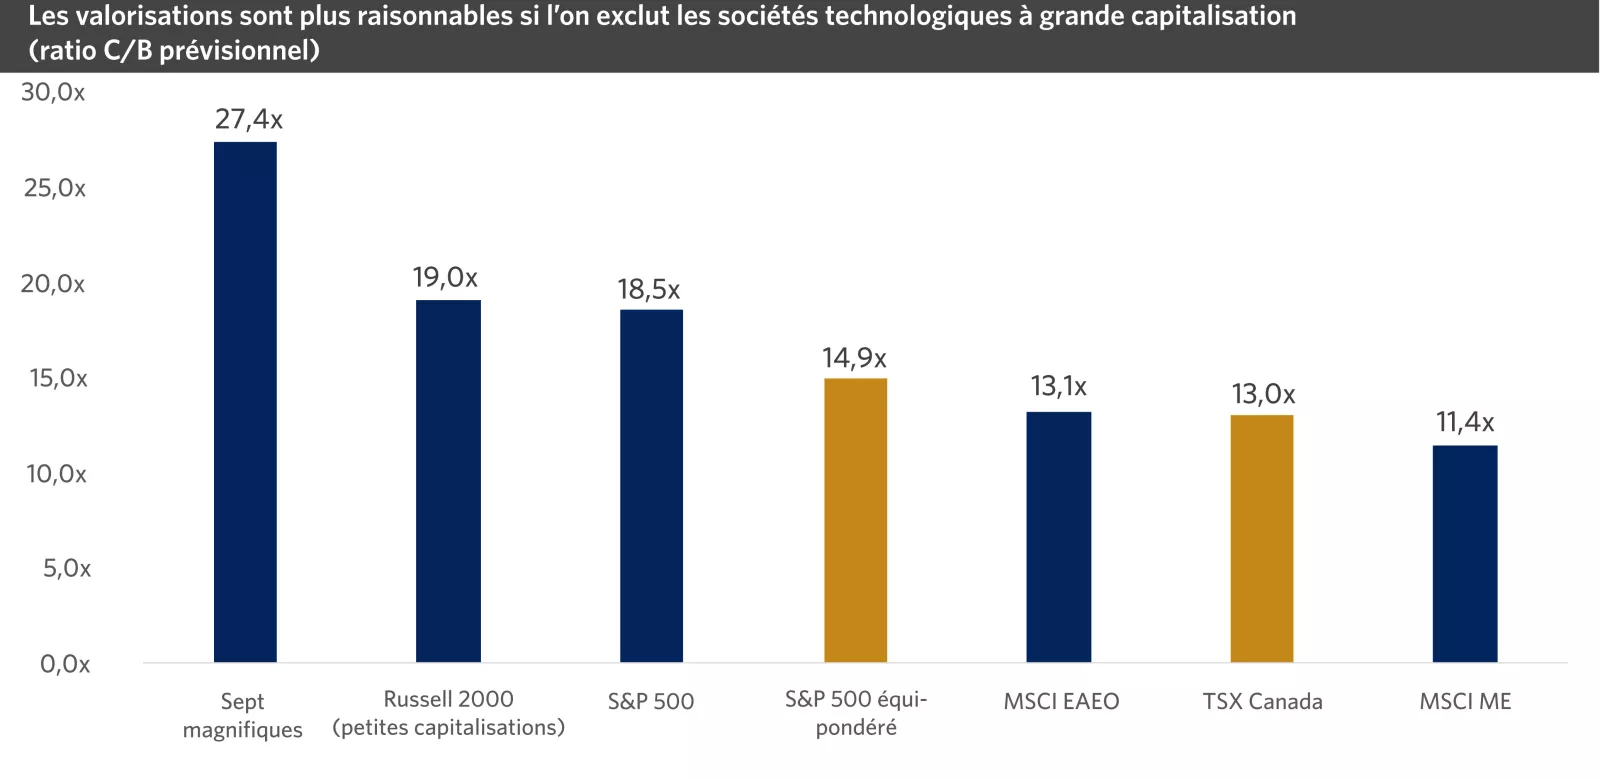 Chart showing Valuations are more reasonable outside of large-cap technology